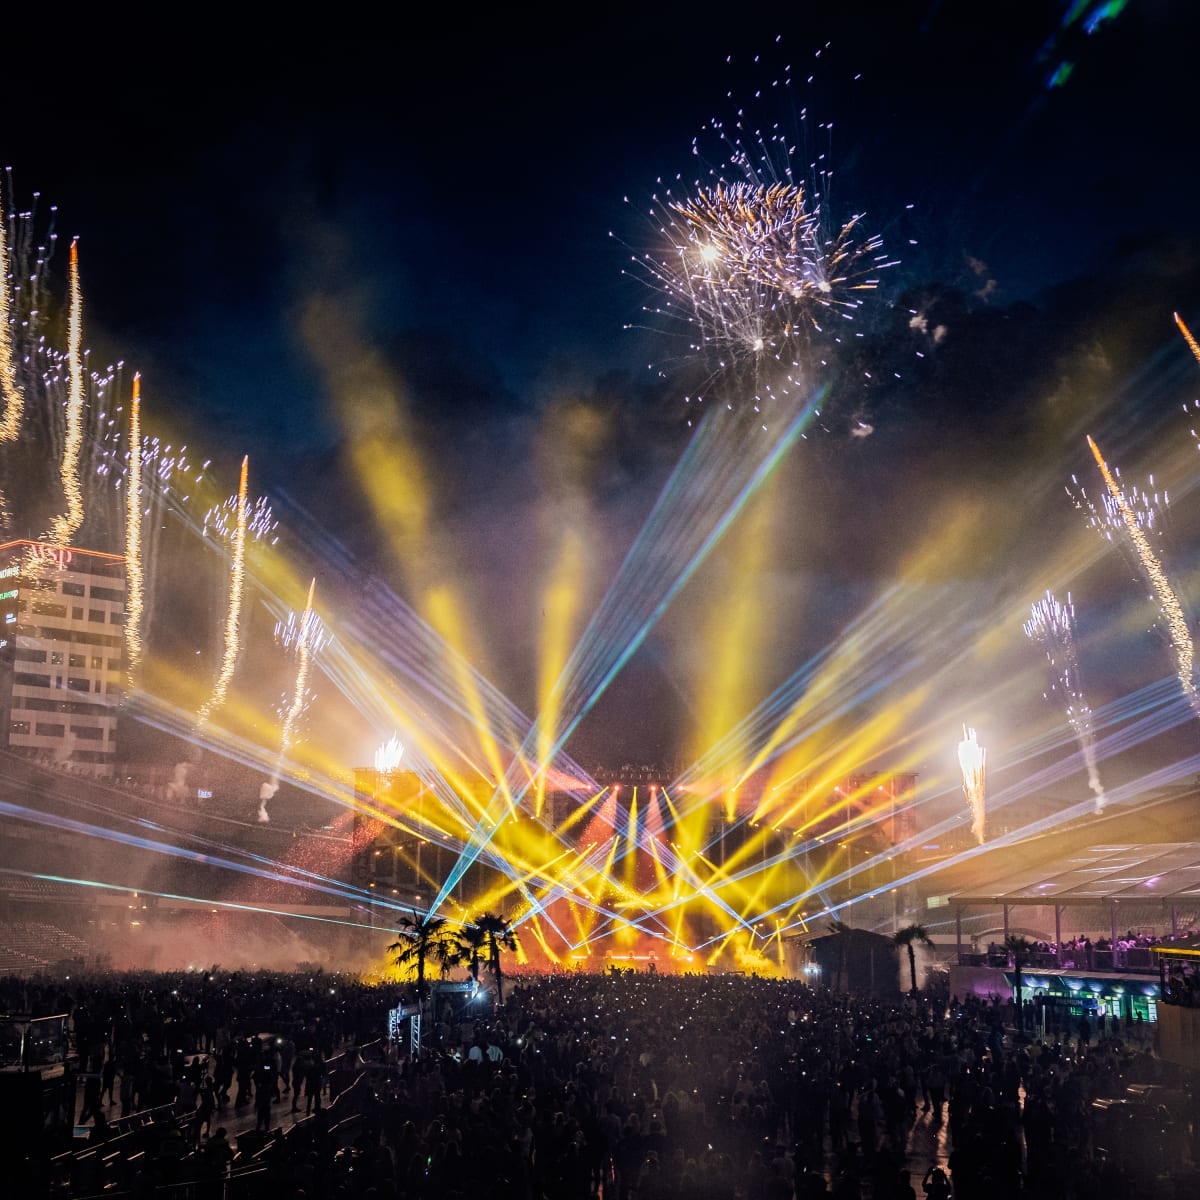 David Guetta, Marshmello, More to DJ at Summerburst's Biggest Festival In  10 Years  - The Latest Electronic Dance Music News, Reviews &  Artists